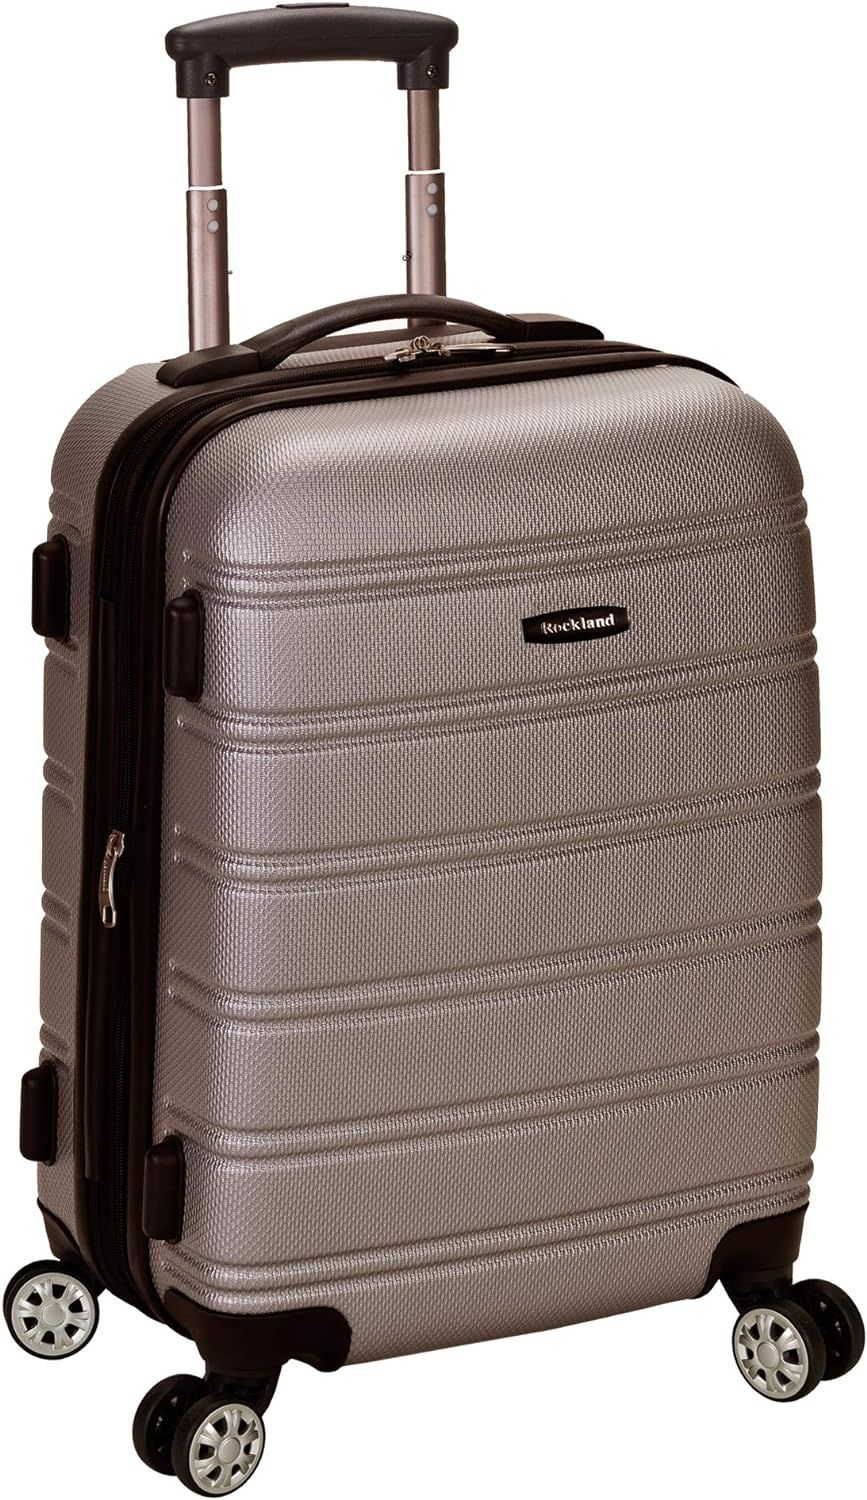 Rockland Melbourne Hardside Expandable Spinner Wheel Luggage, Silver, Carry-On 20-Inch | Amazon (US)